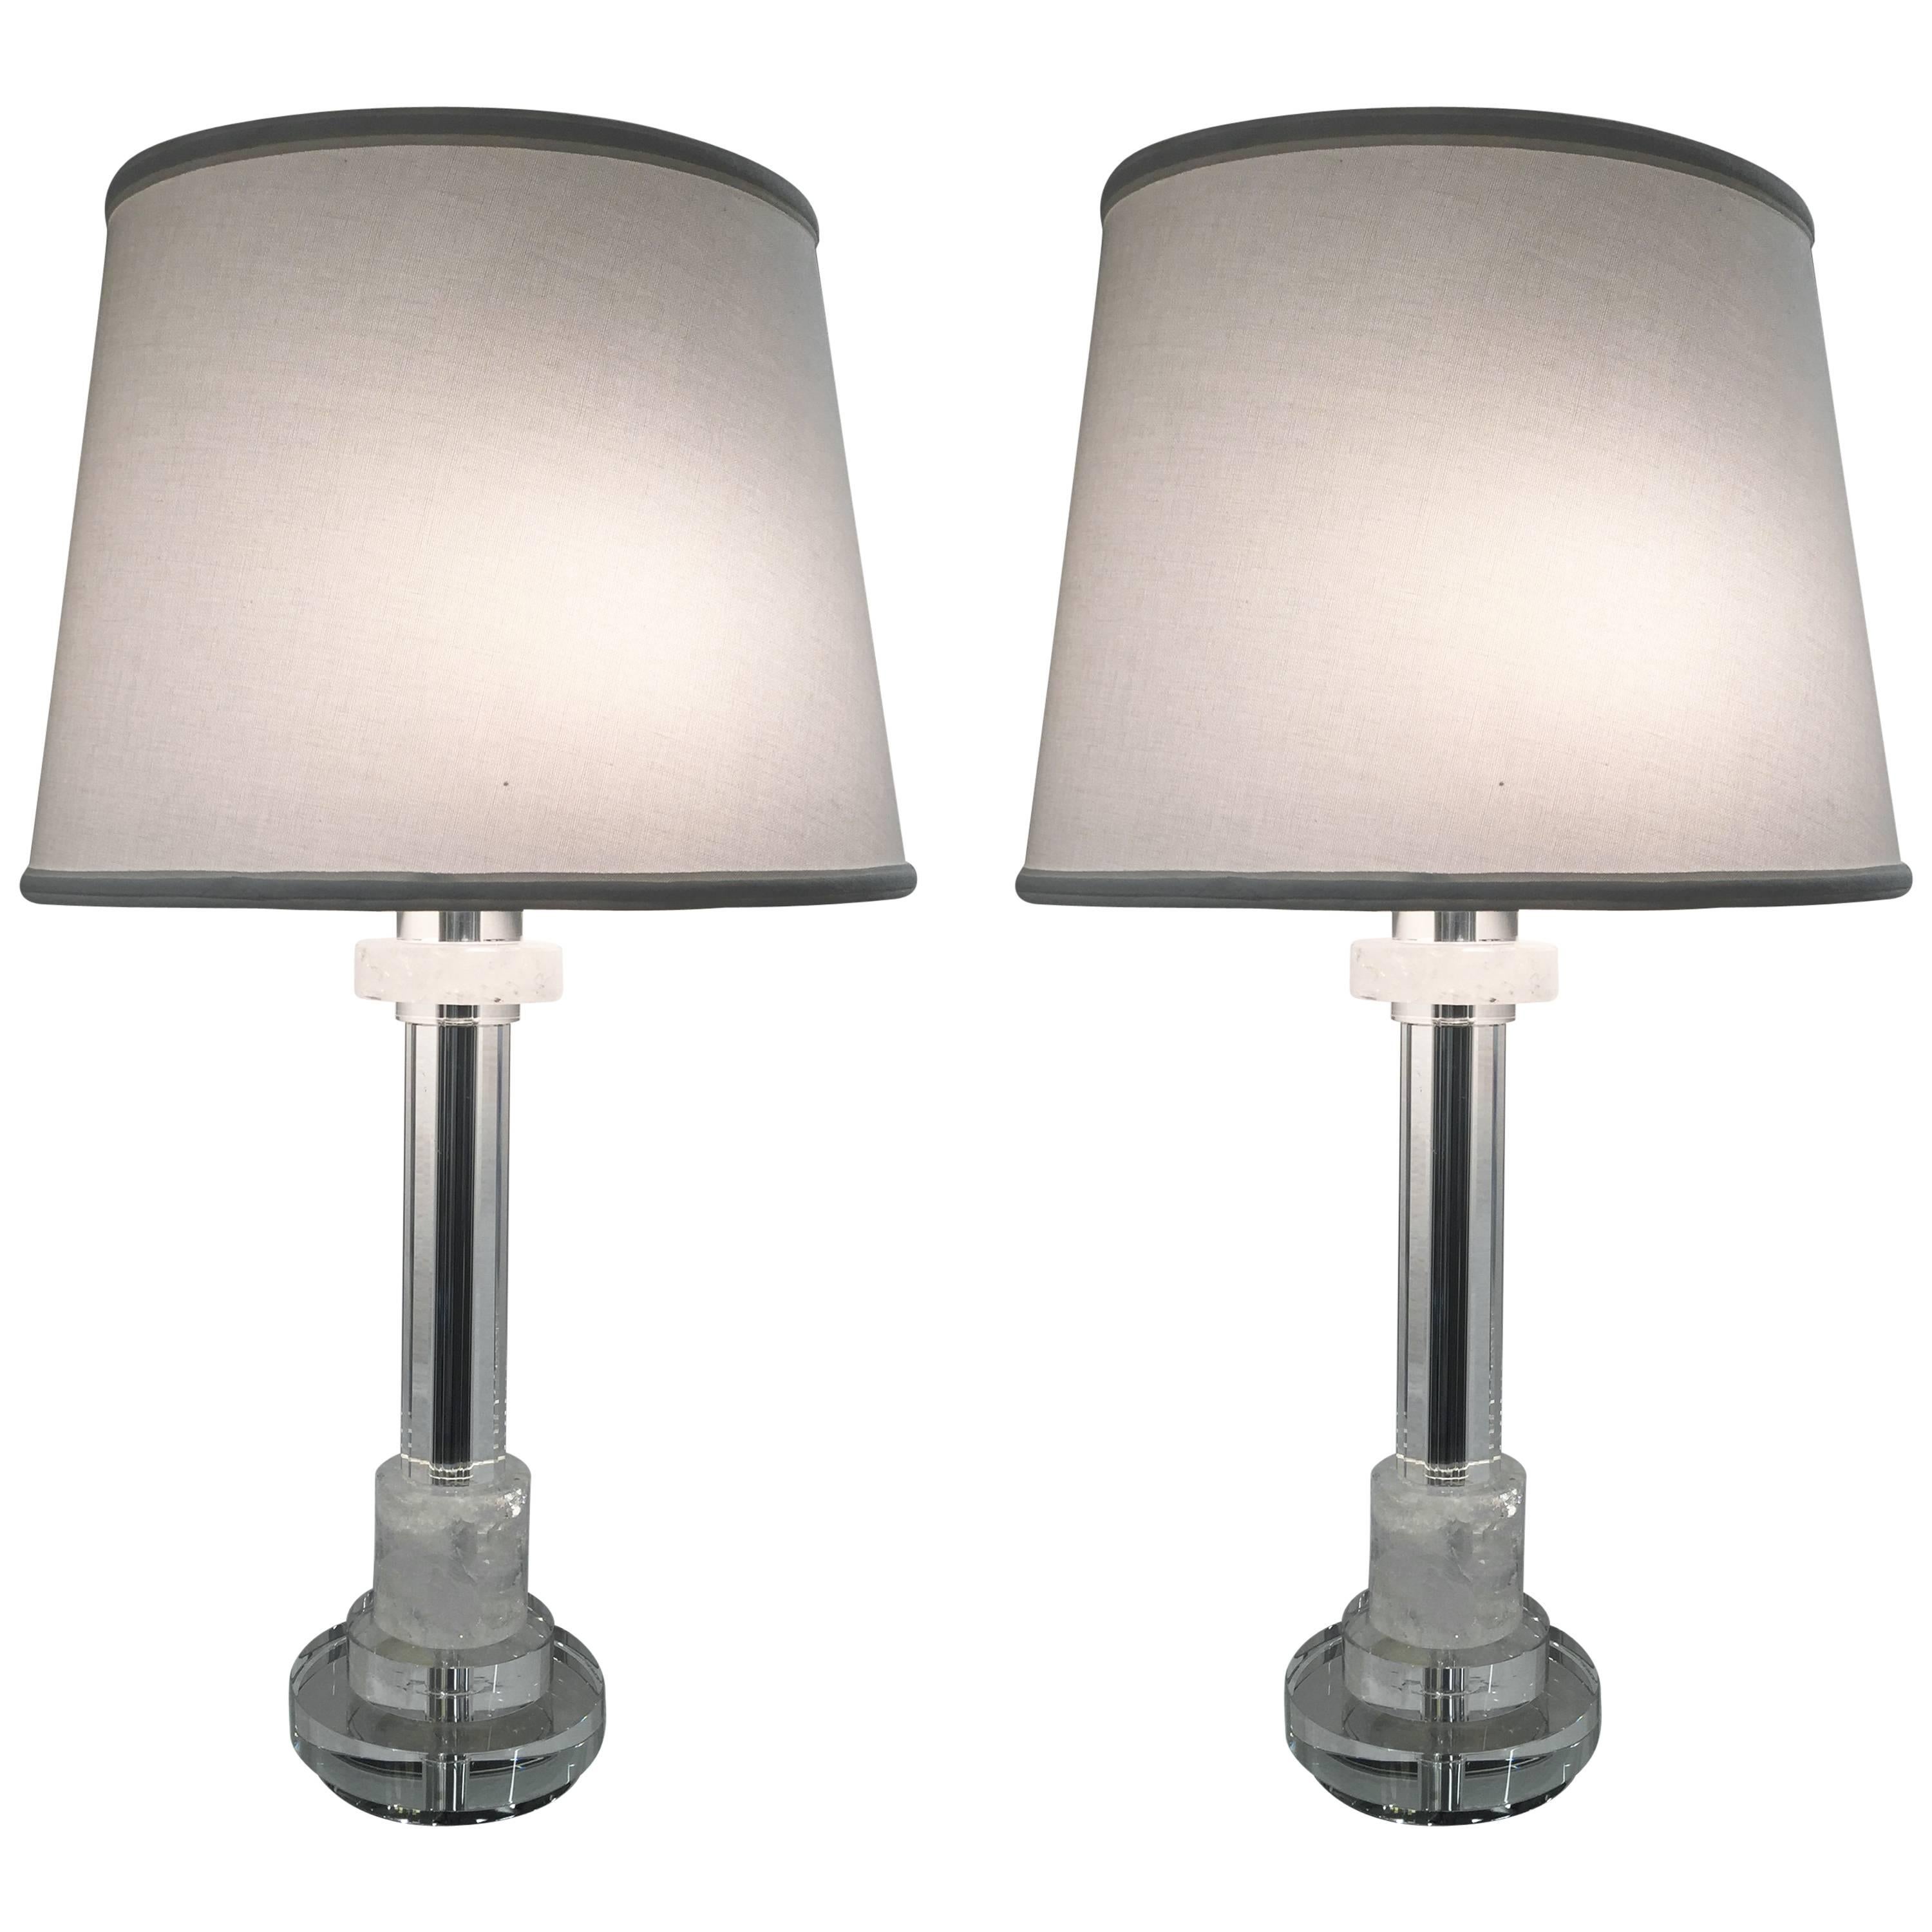 Pair of Les Prismatique Rock Crystal / Crystal Mirrored Chrome Lamps